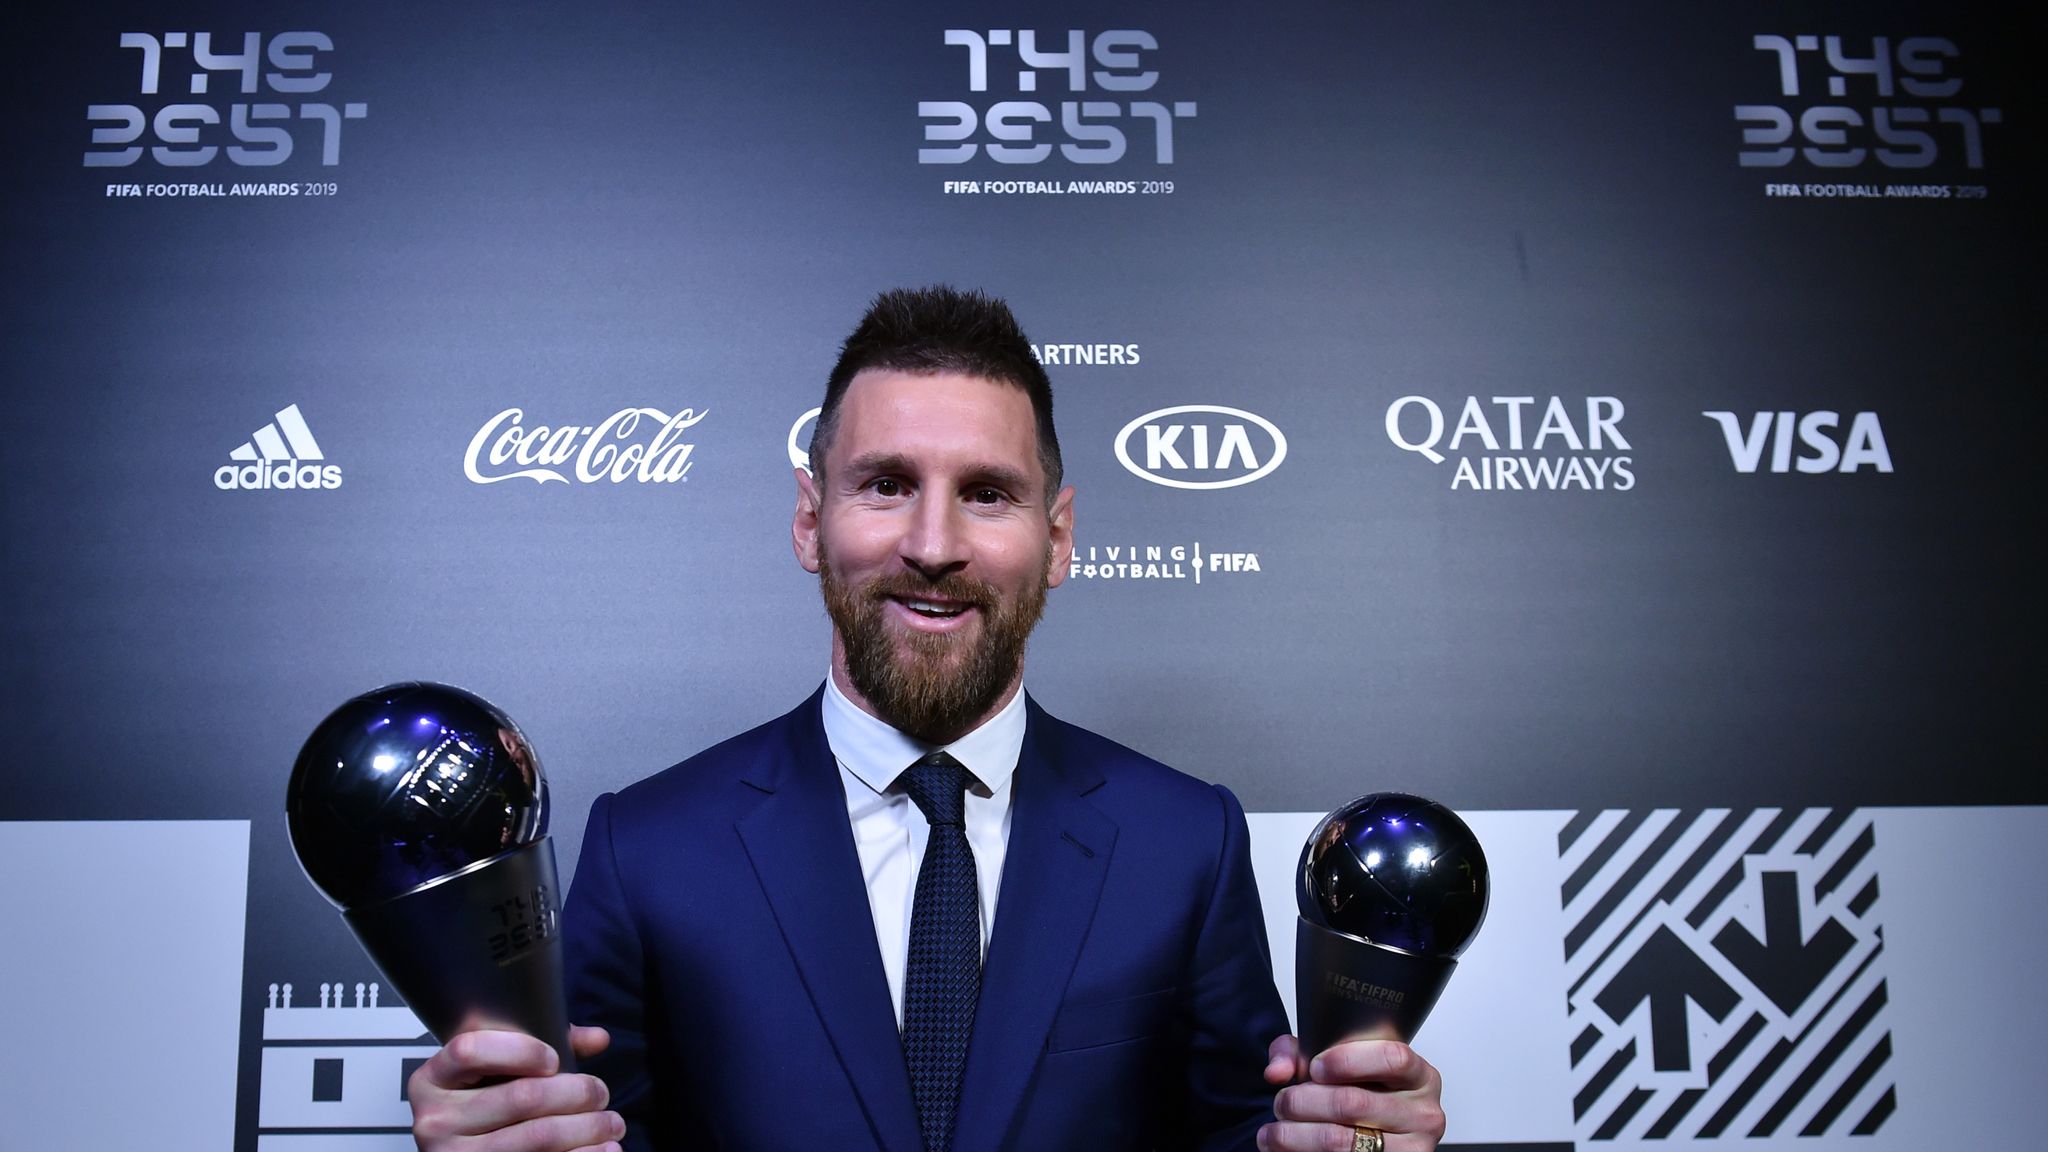 Has Messi ever won FIFA best player?